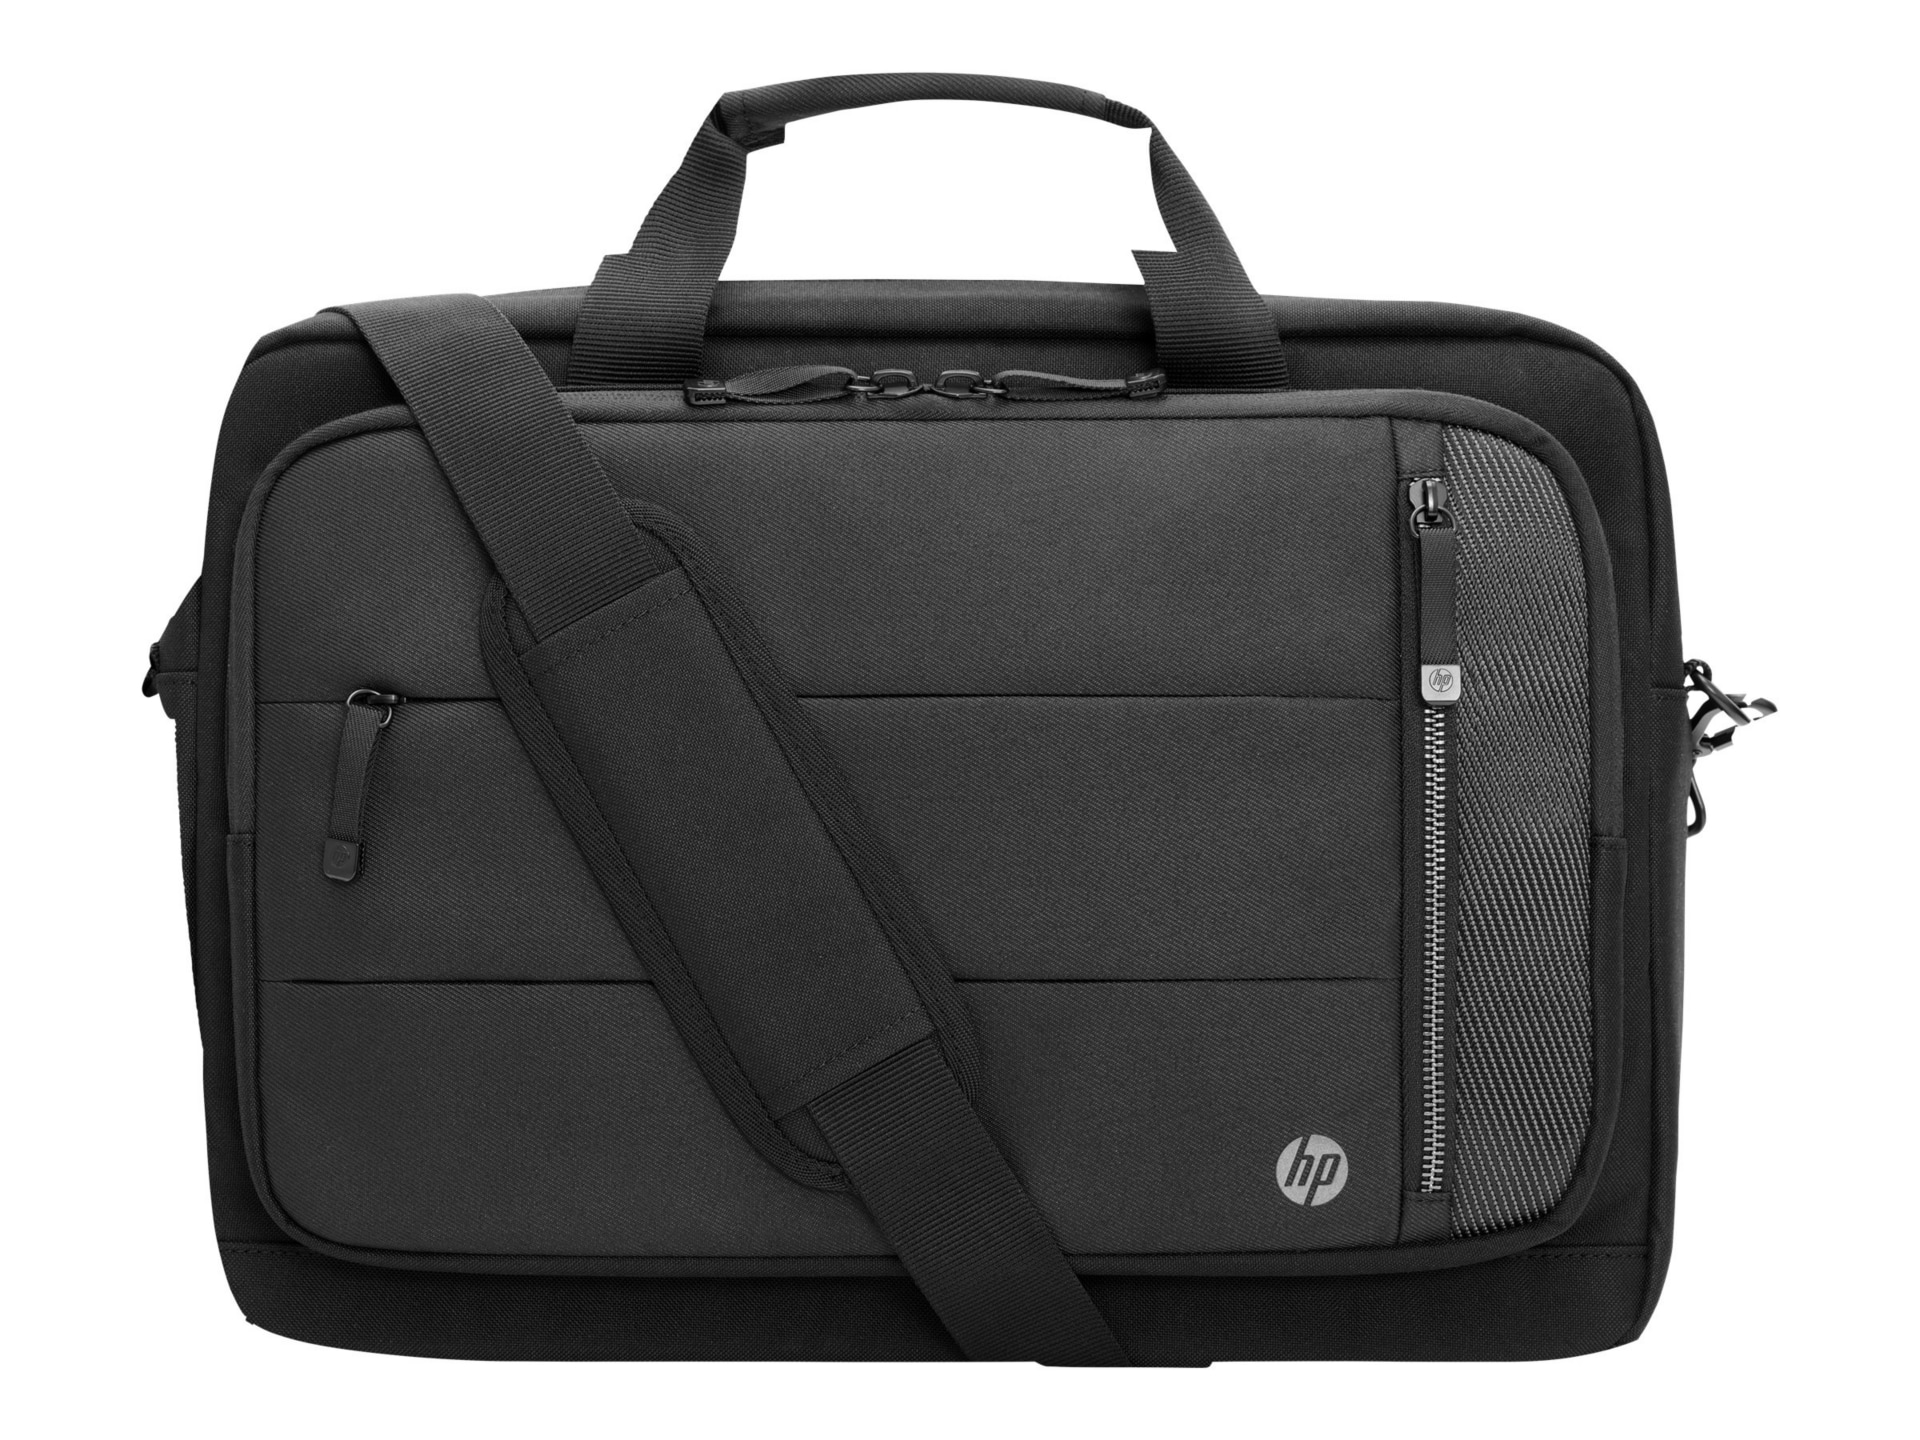 HP Renew Executive Carrying Case for 14" to 16.1" HP Notebook, Accessories